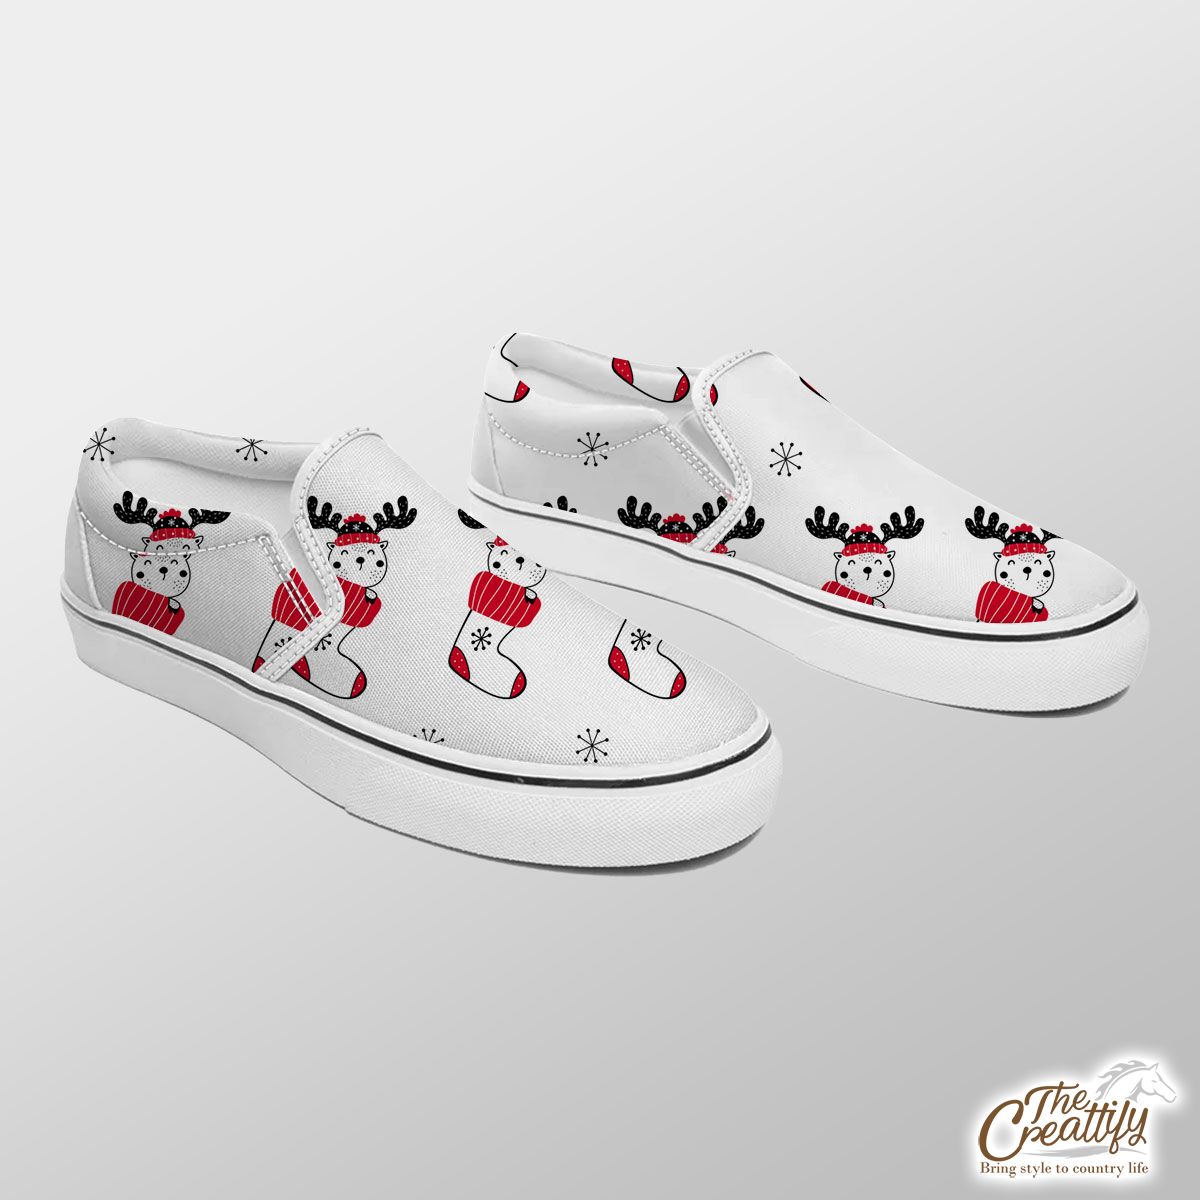 Reindeer Clipart In Hand Drawn Red Socks And Snowflake Clipart Seamless White Pattern Slip On Sneakers